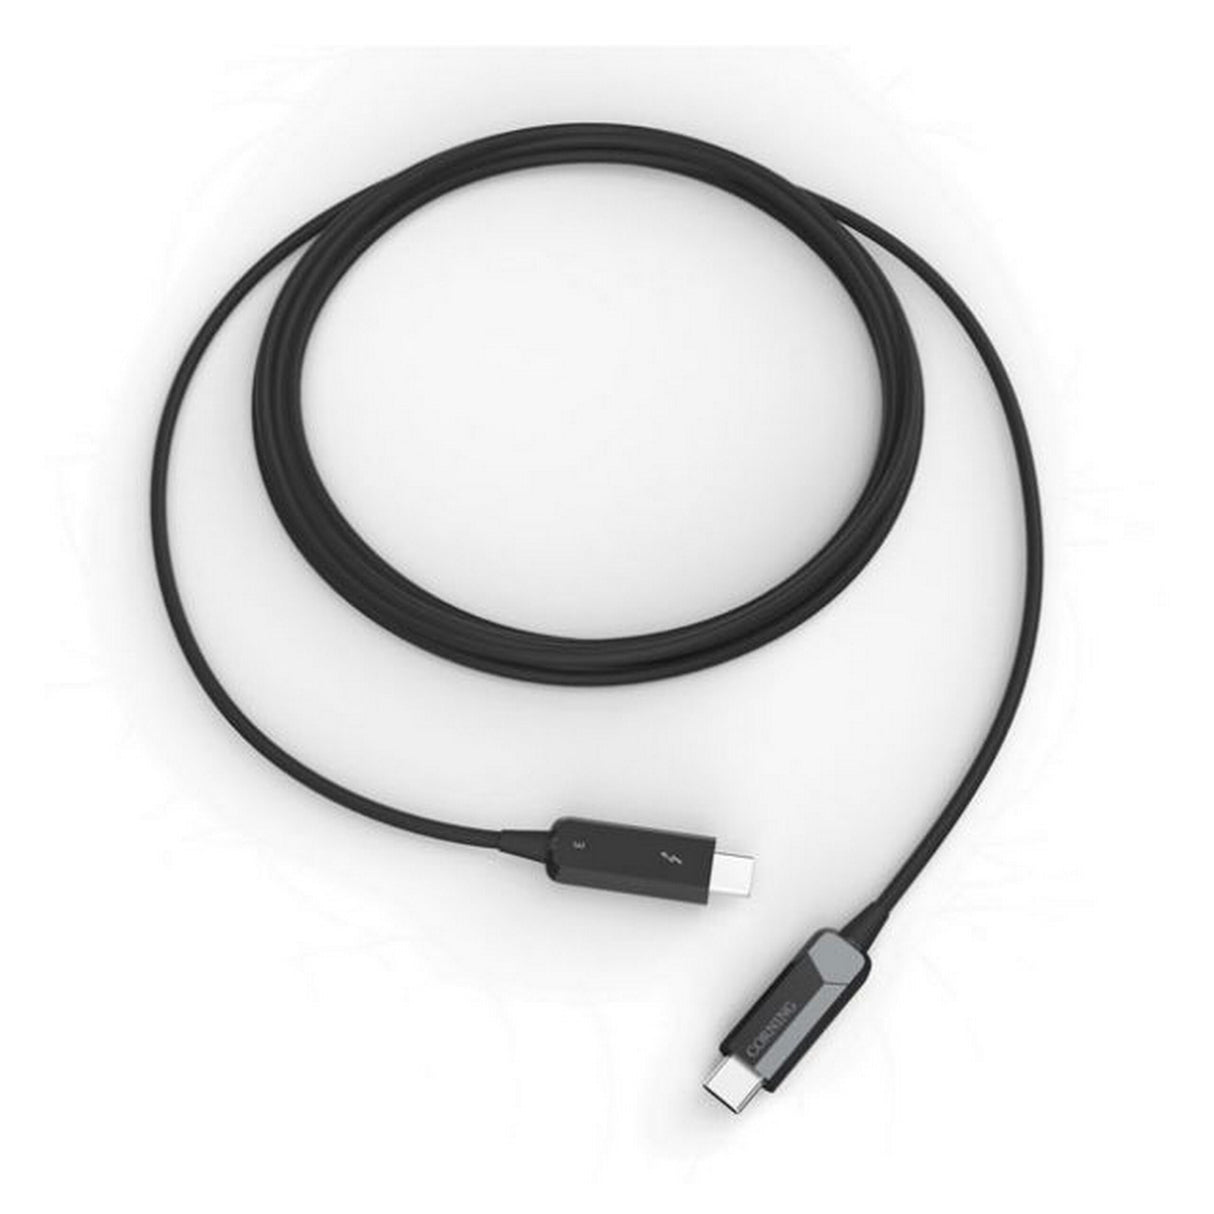 Corning 10 Meter Thunderbolt 3 USB-C Optical Cable